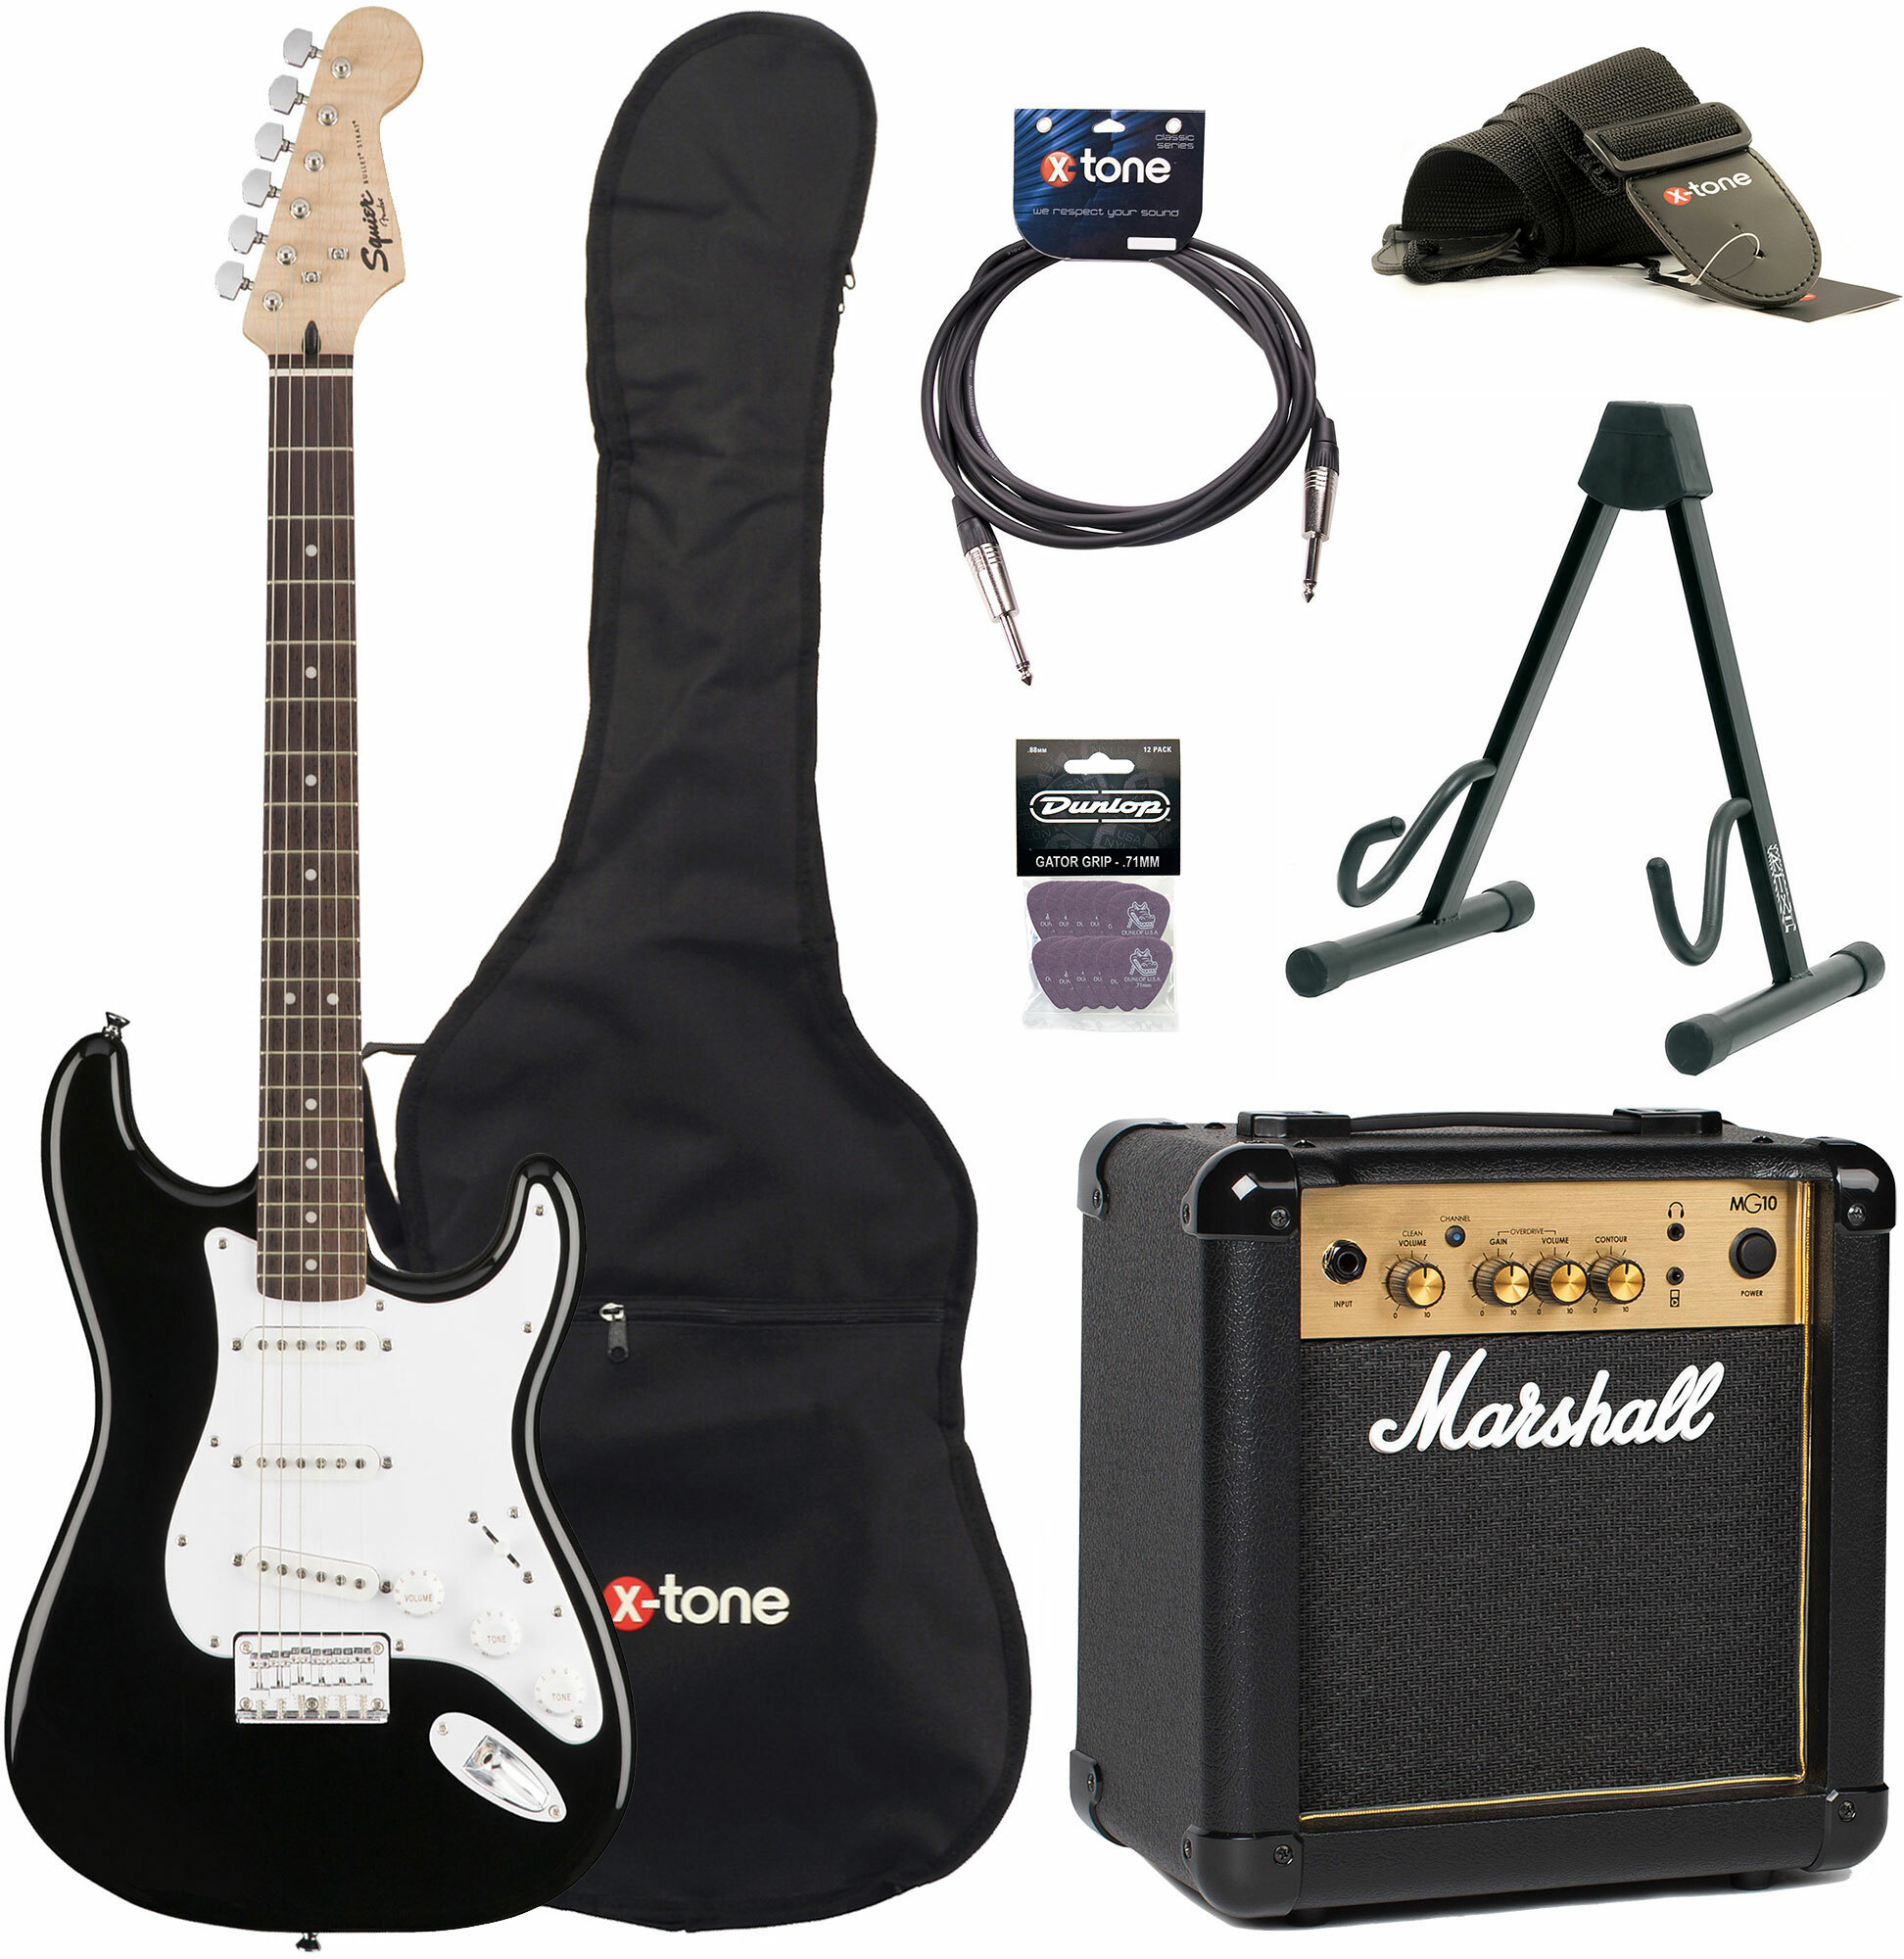 Squier Strat Bullet Ht Hss + Marshall Mg10g + X-tone Access - Black - Packs guitarra eléctrica - Main picture